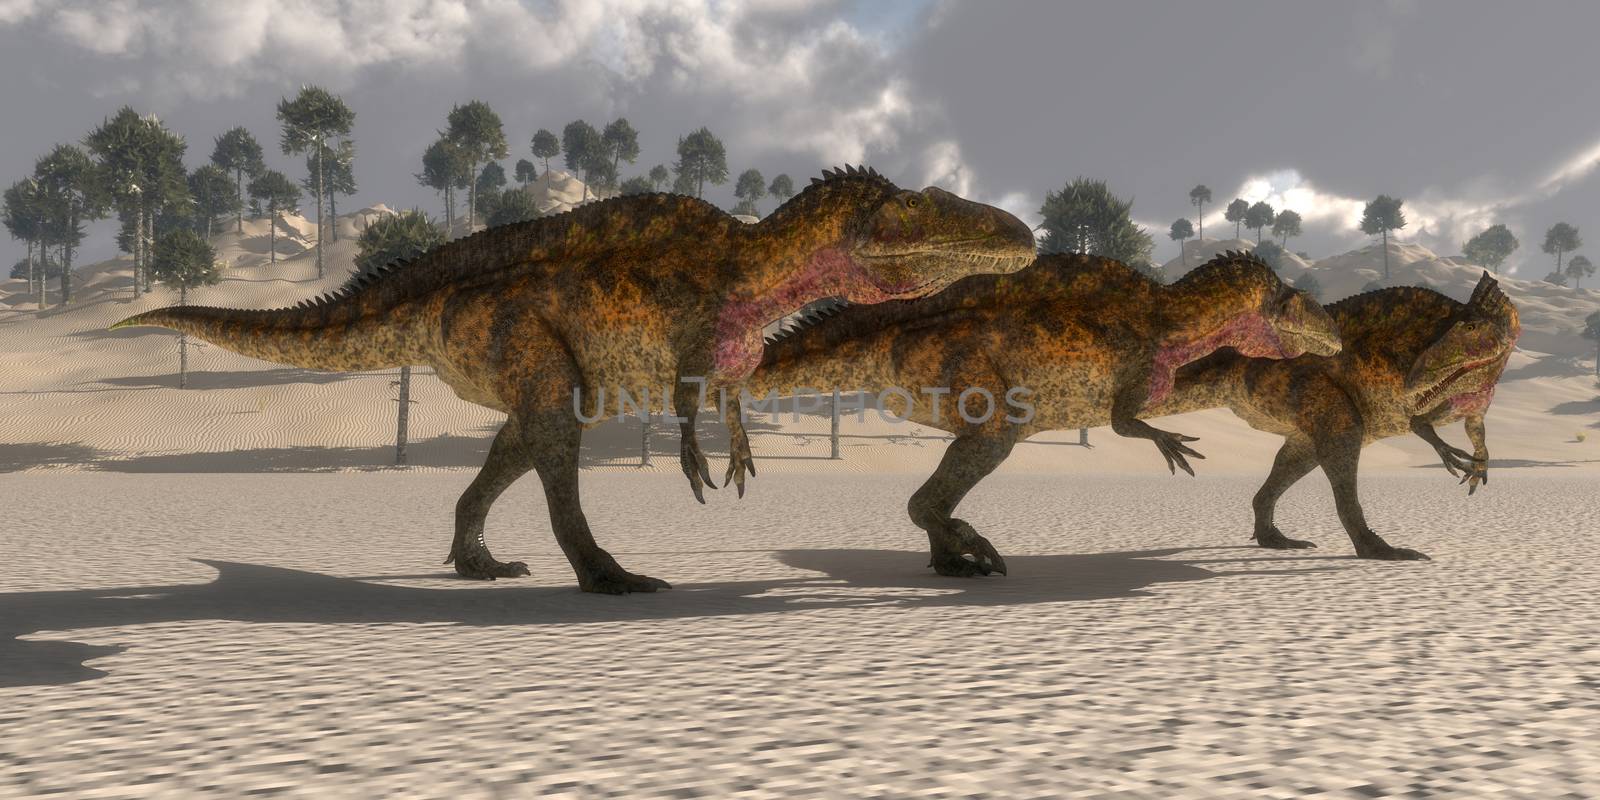 Acrocanthosaurus theropod dinosaurs band together to search for prey in the Cretaceous period.